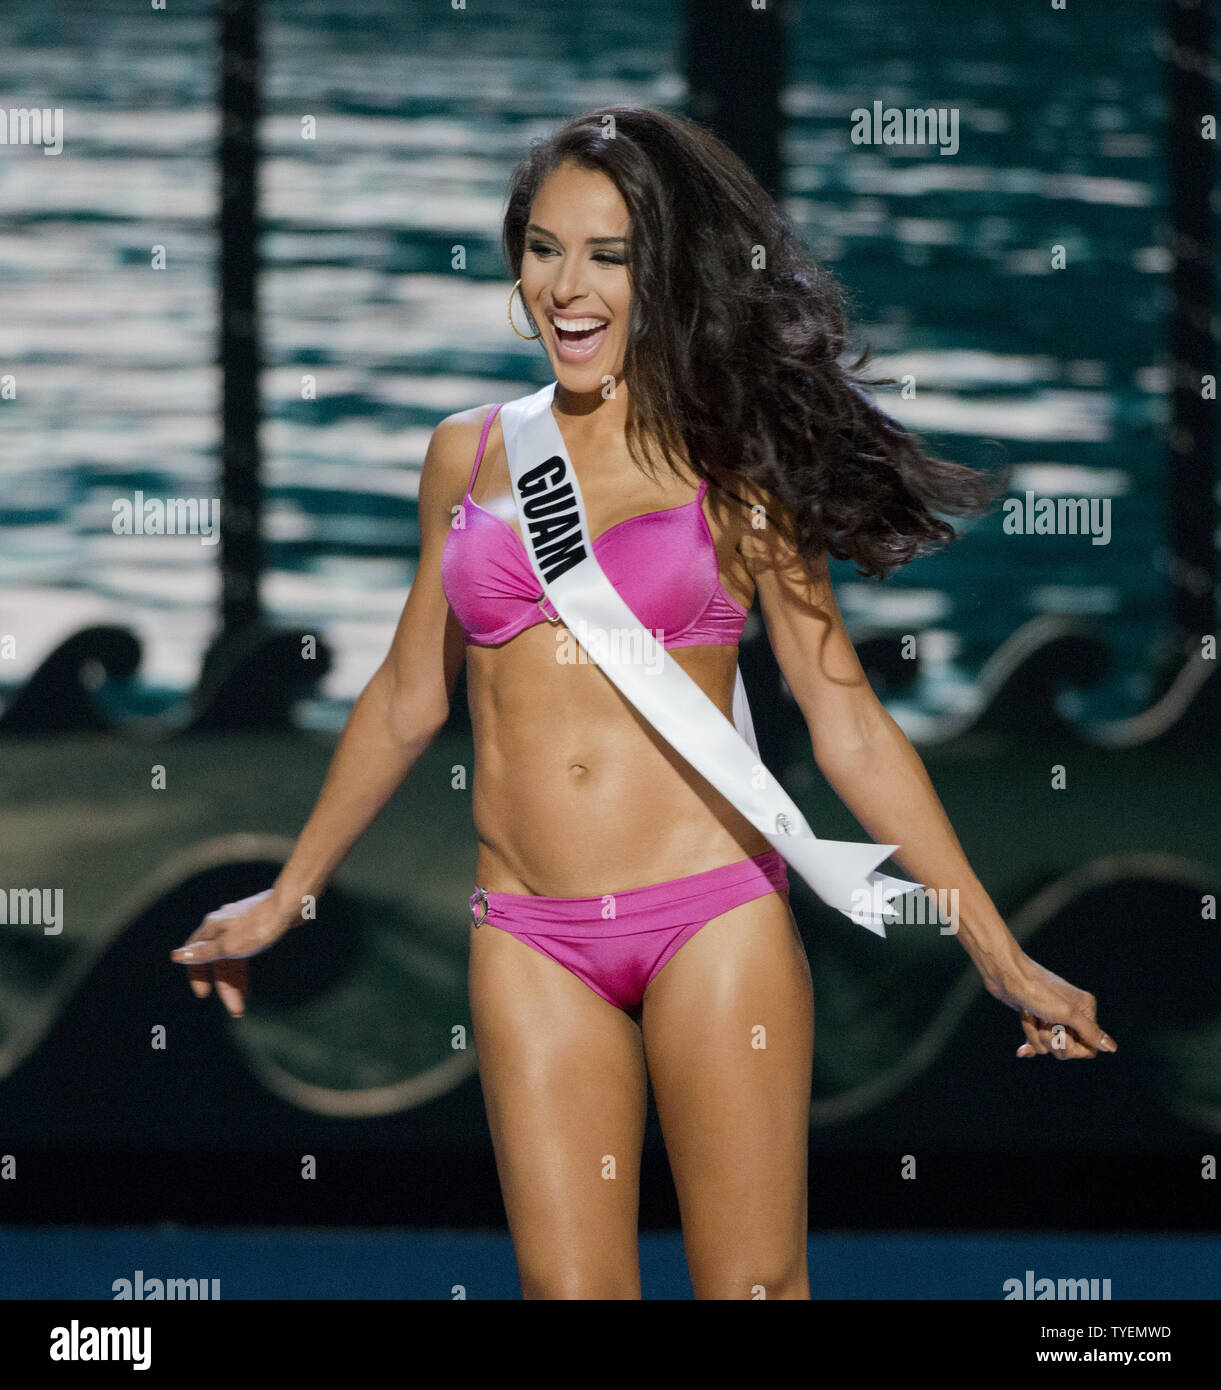 Miss Universe contestant Brittany Bell from Guam competes during the bikini  competition event at U.S. Century Bank Arena, Florida International  University in Miami, Florida on January 21, 2015. The 63rd. Miss Universe